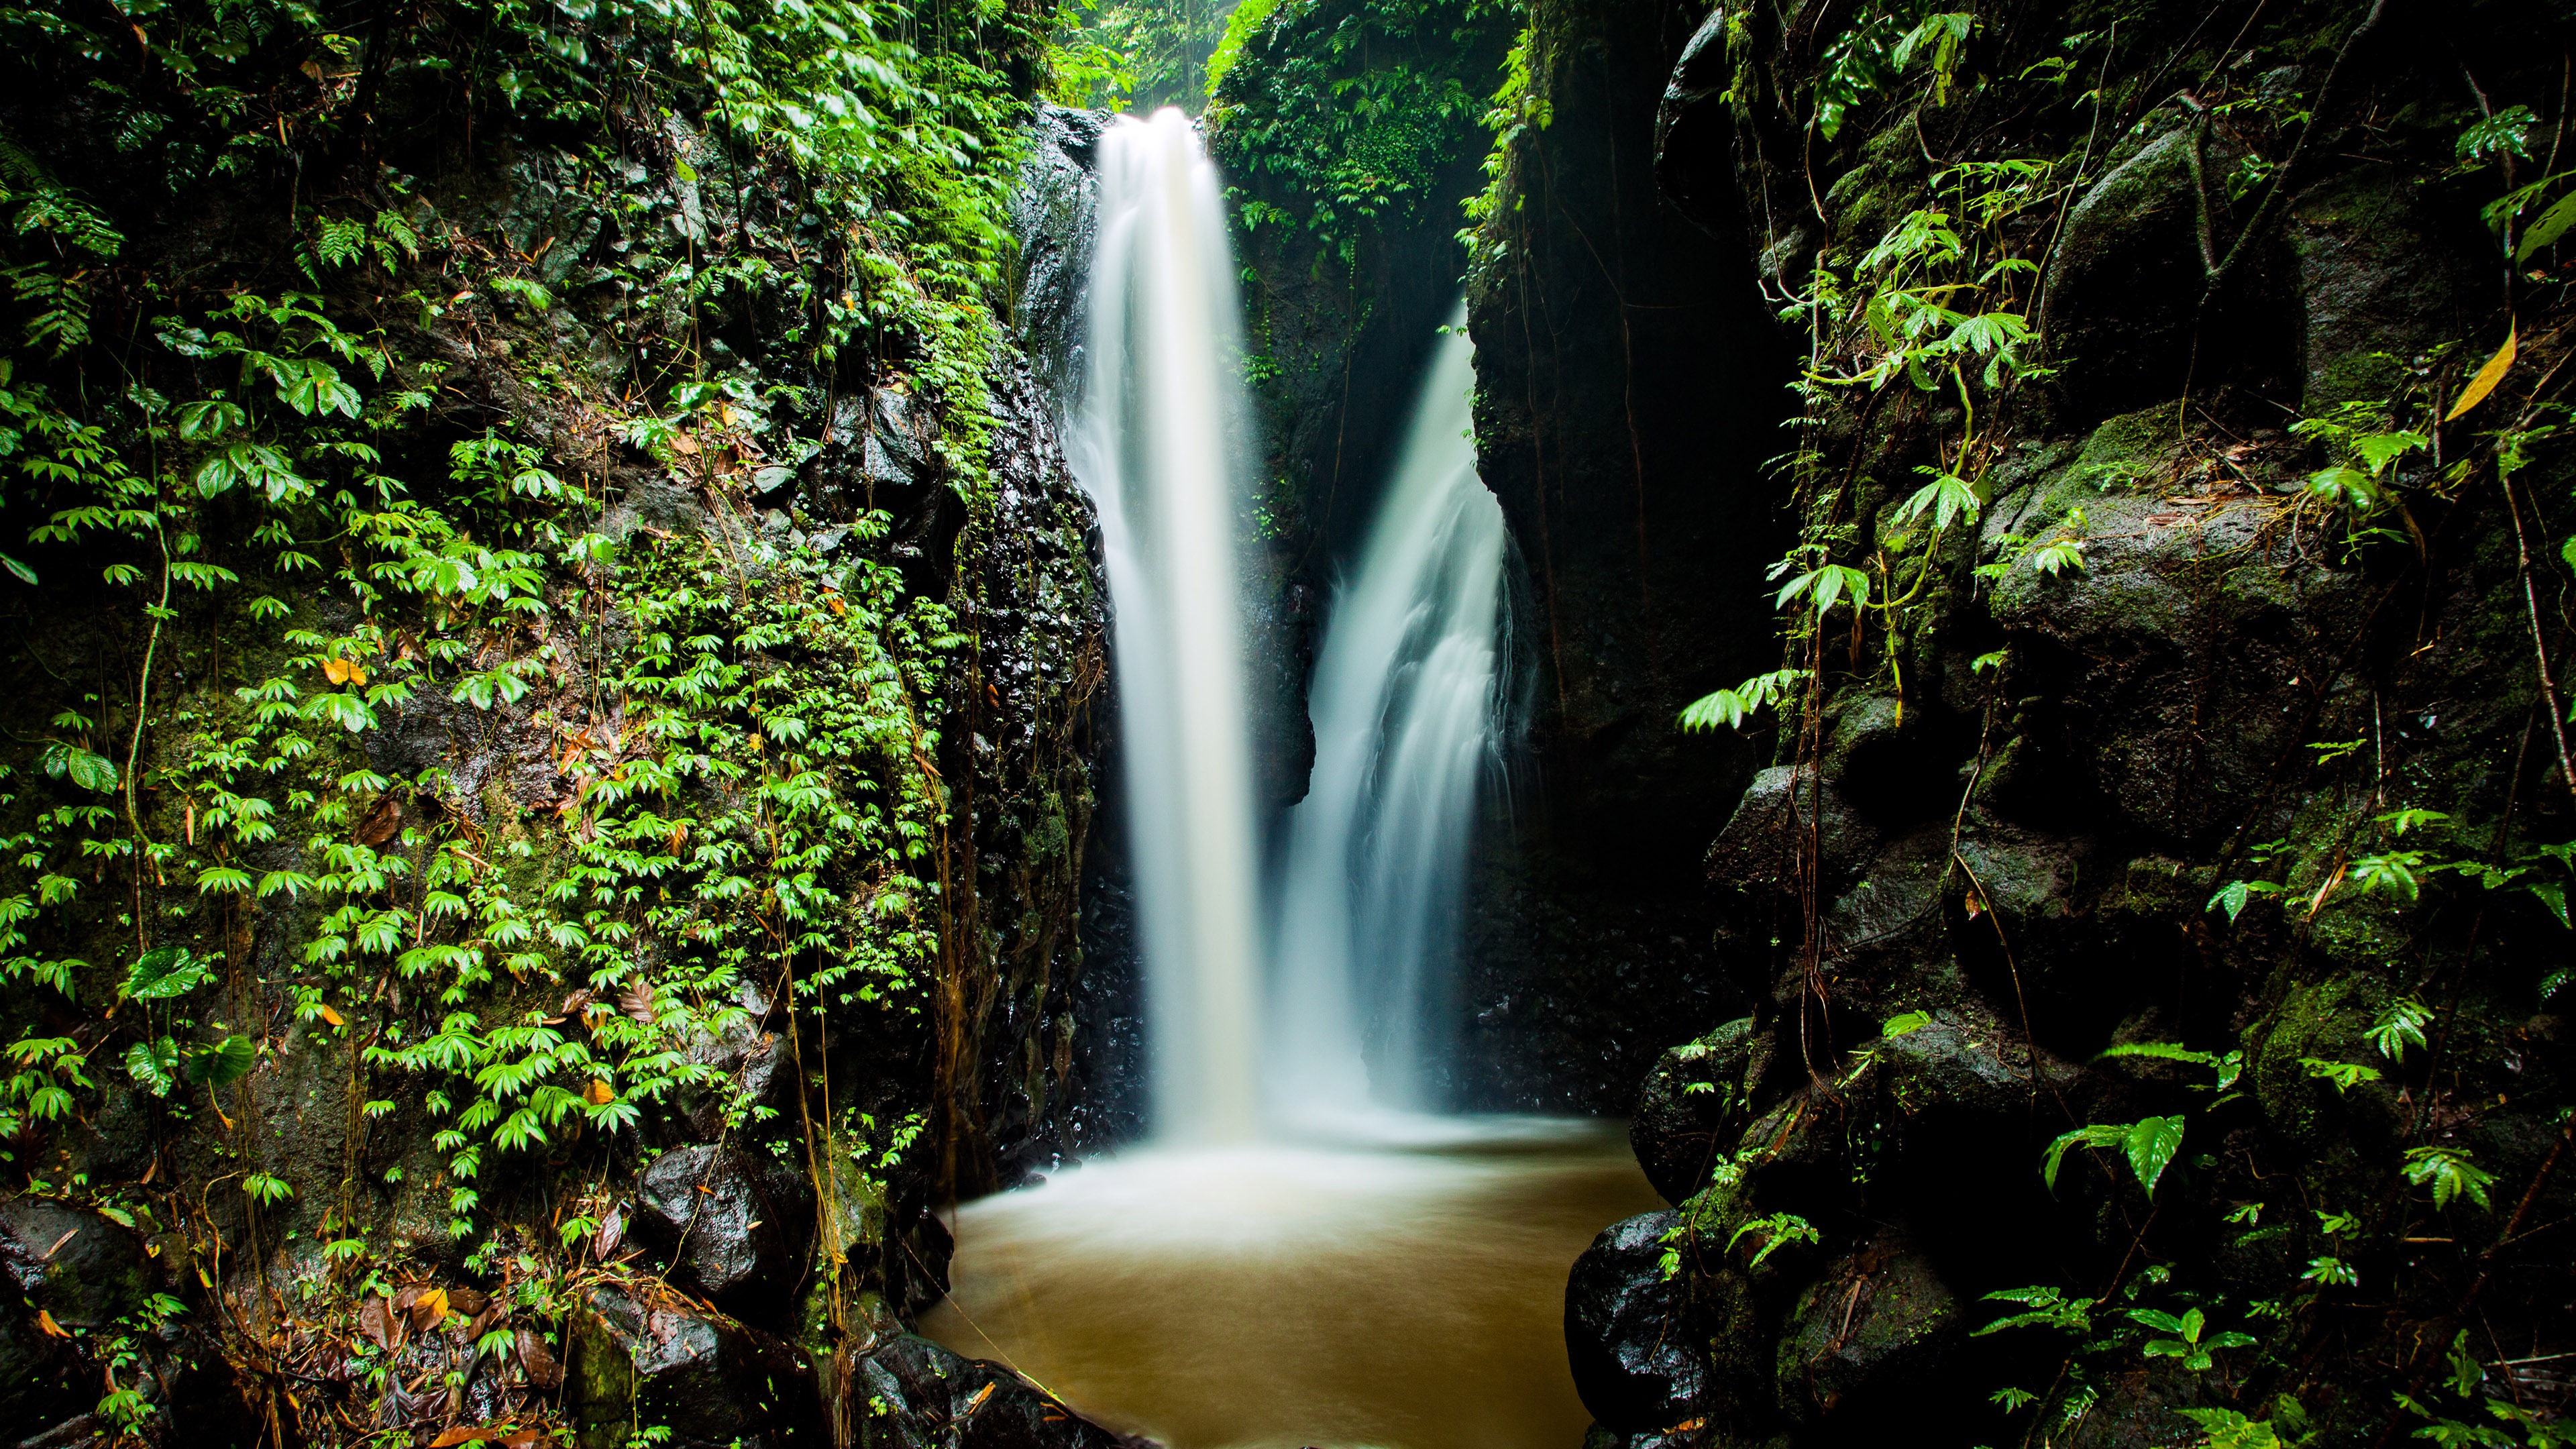 Spring Forest Waterfall Background 4k Wallpaper - Jungle Creative Commons - HD Wallpaper 